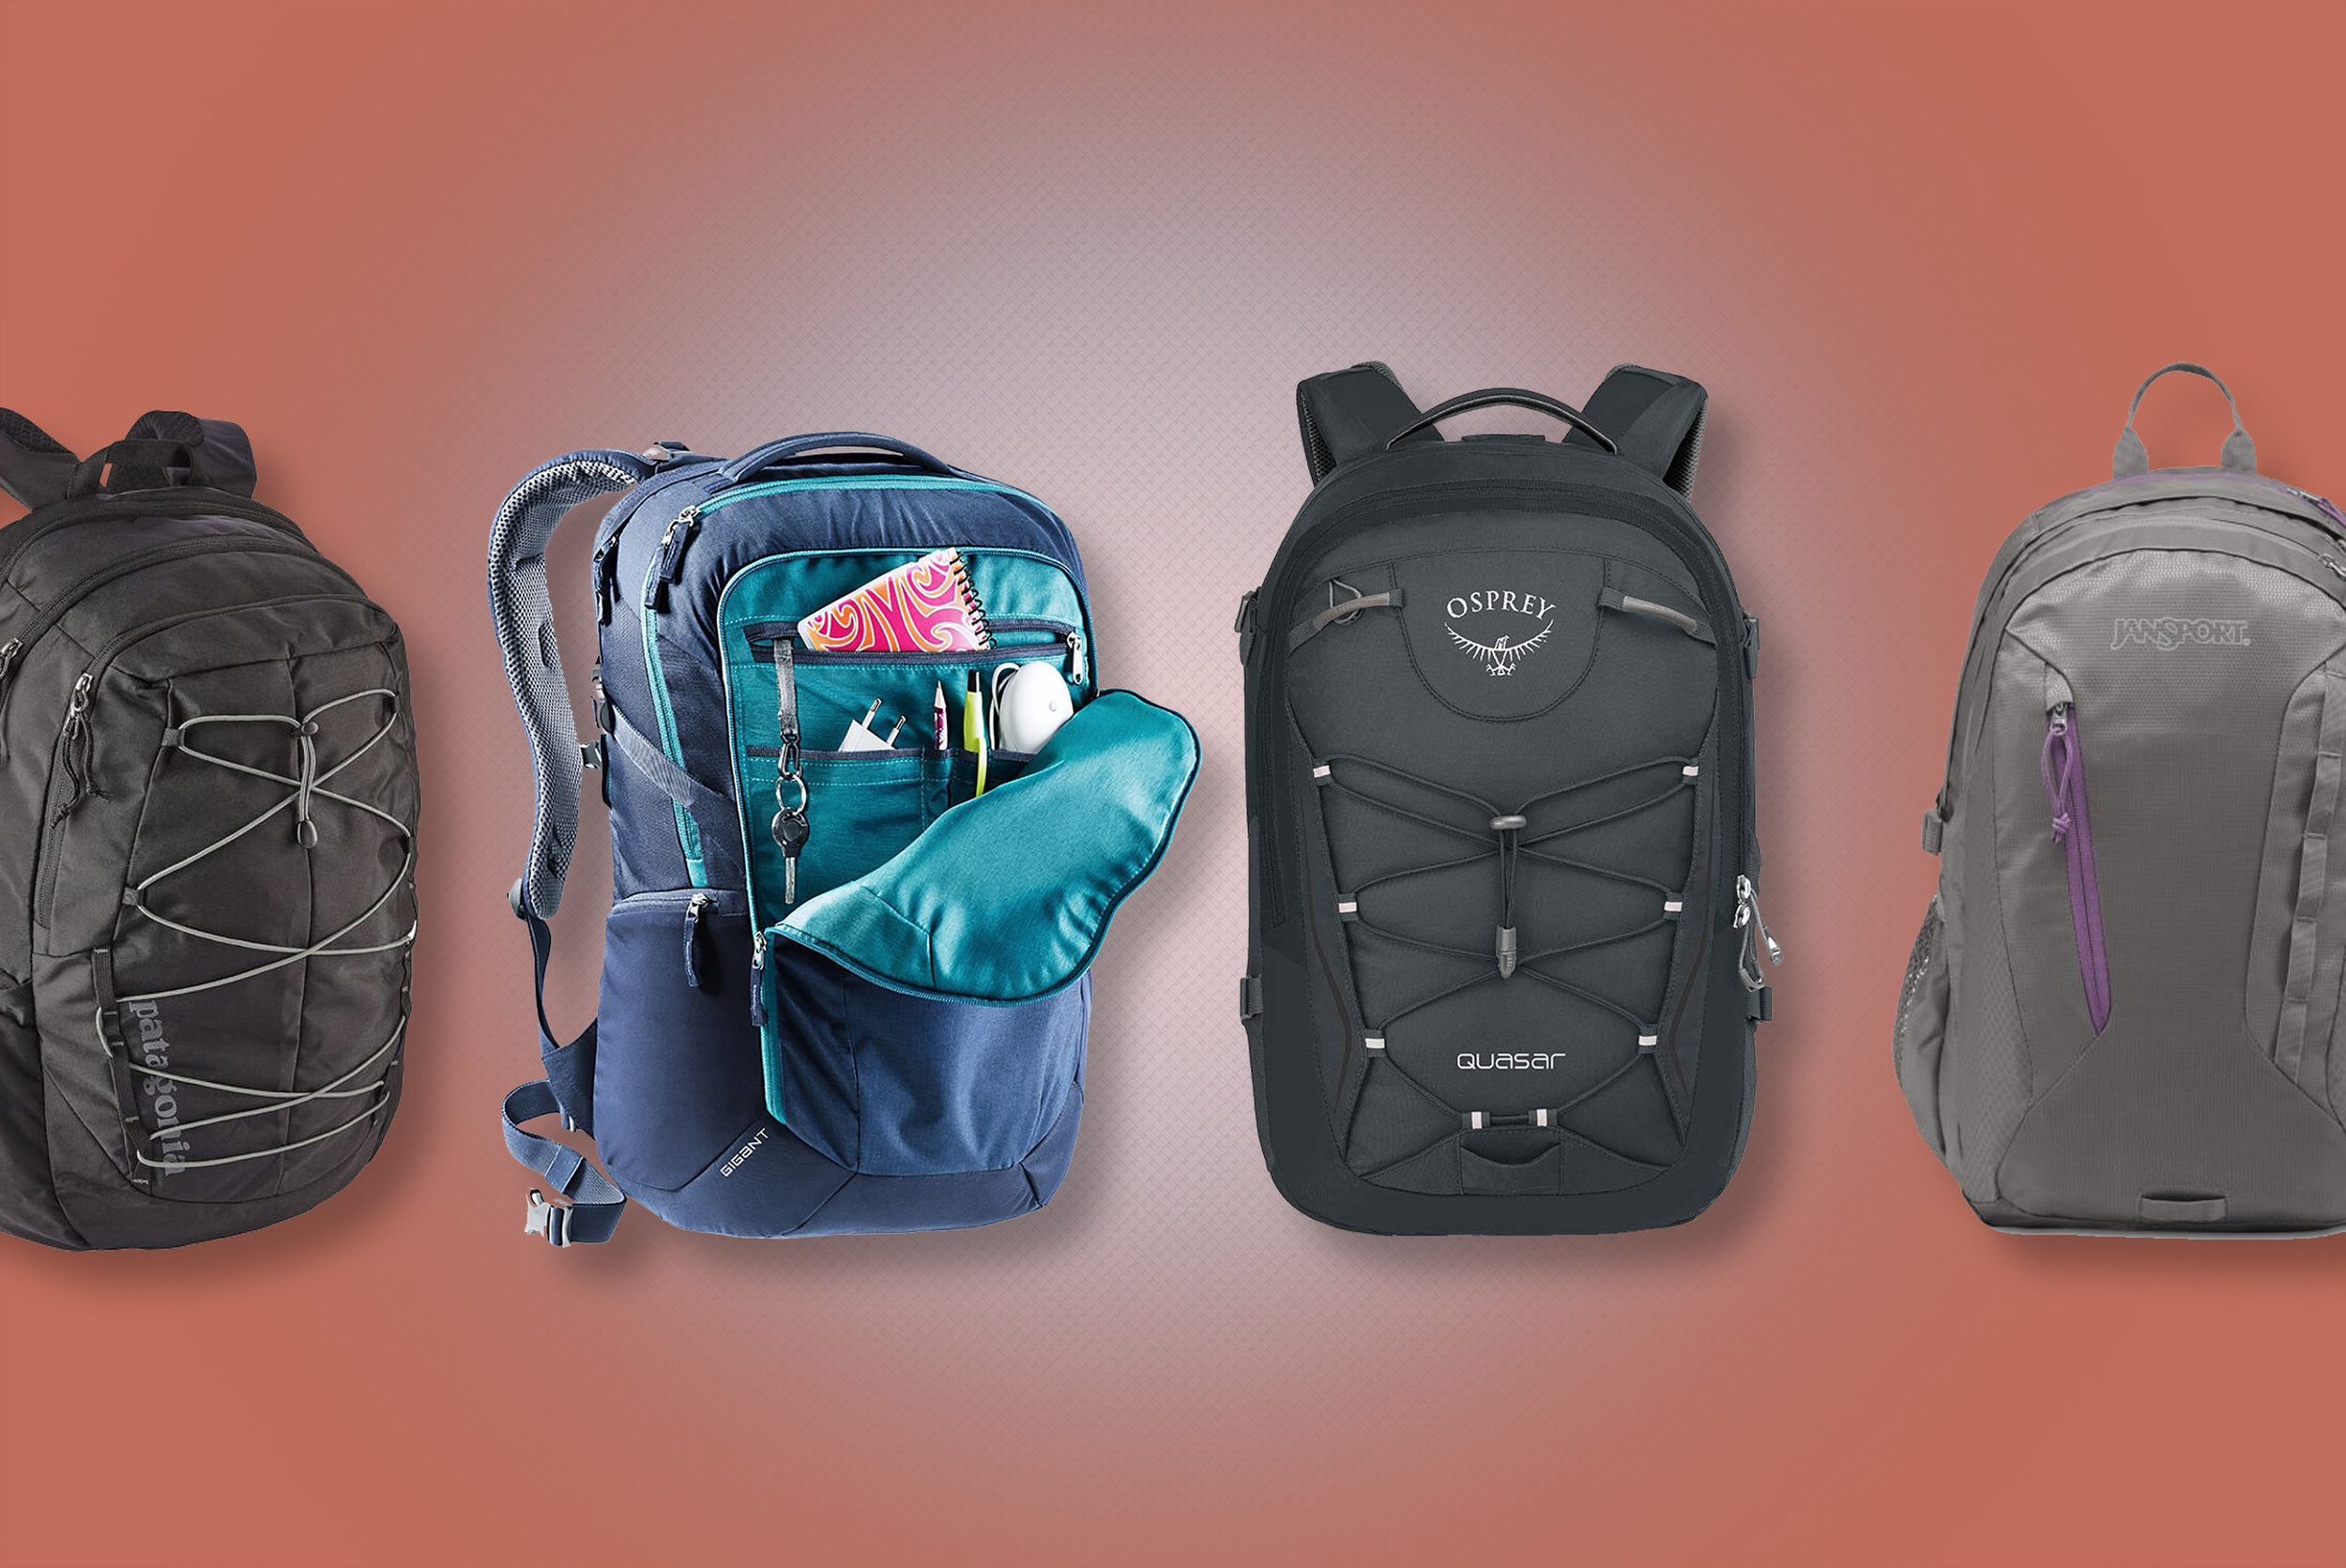 11 Backpacks Like North Face You Should Check Out Backpackies